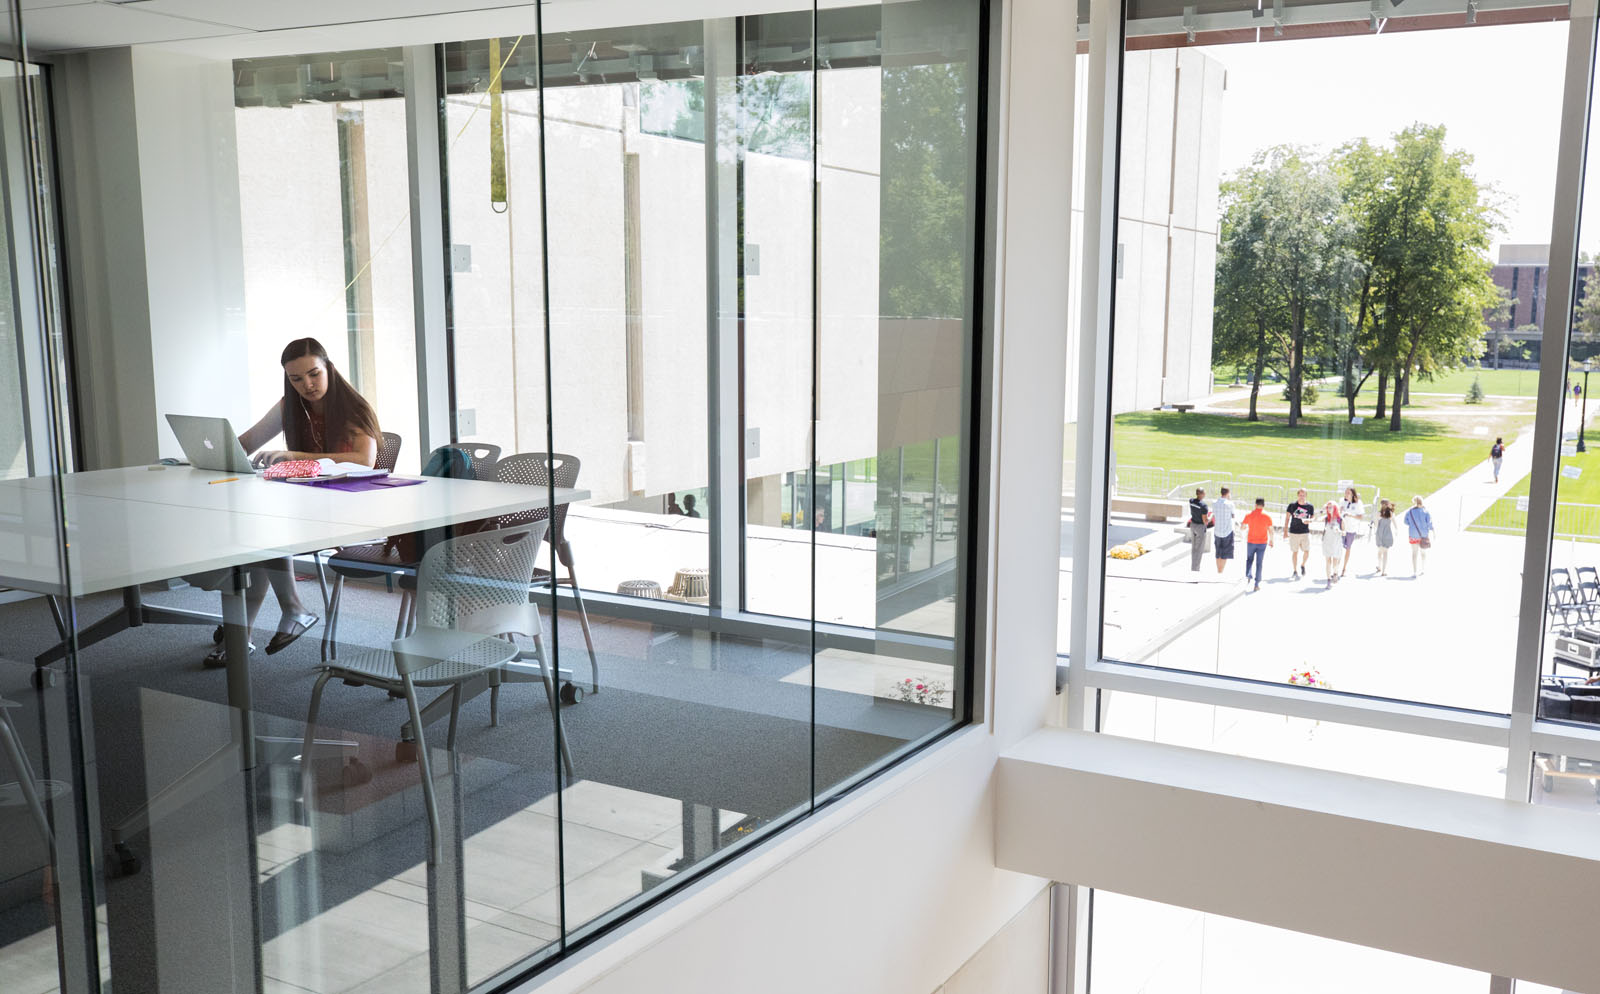 Students study and visit the Tutt Library during the first day of classes and first day open to the public.